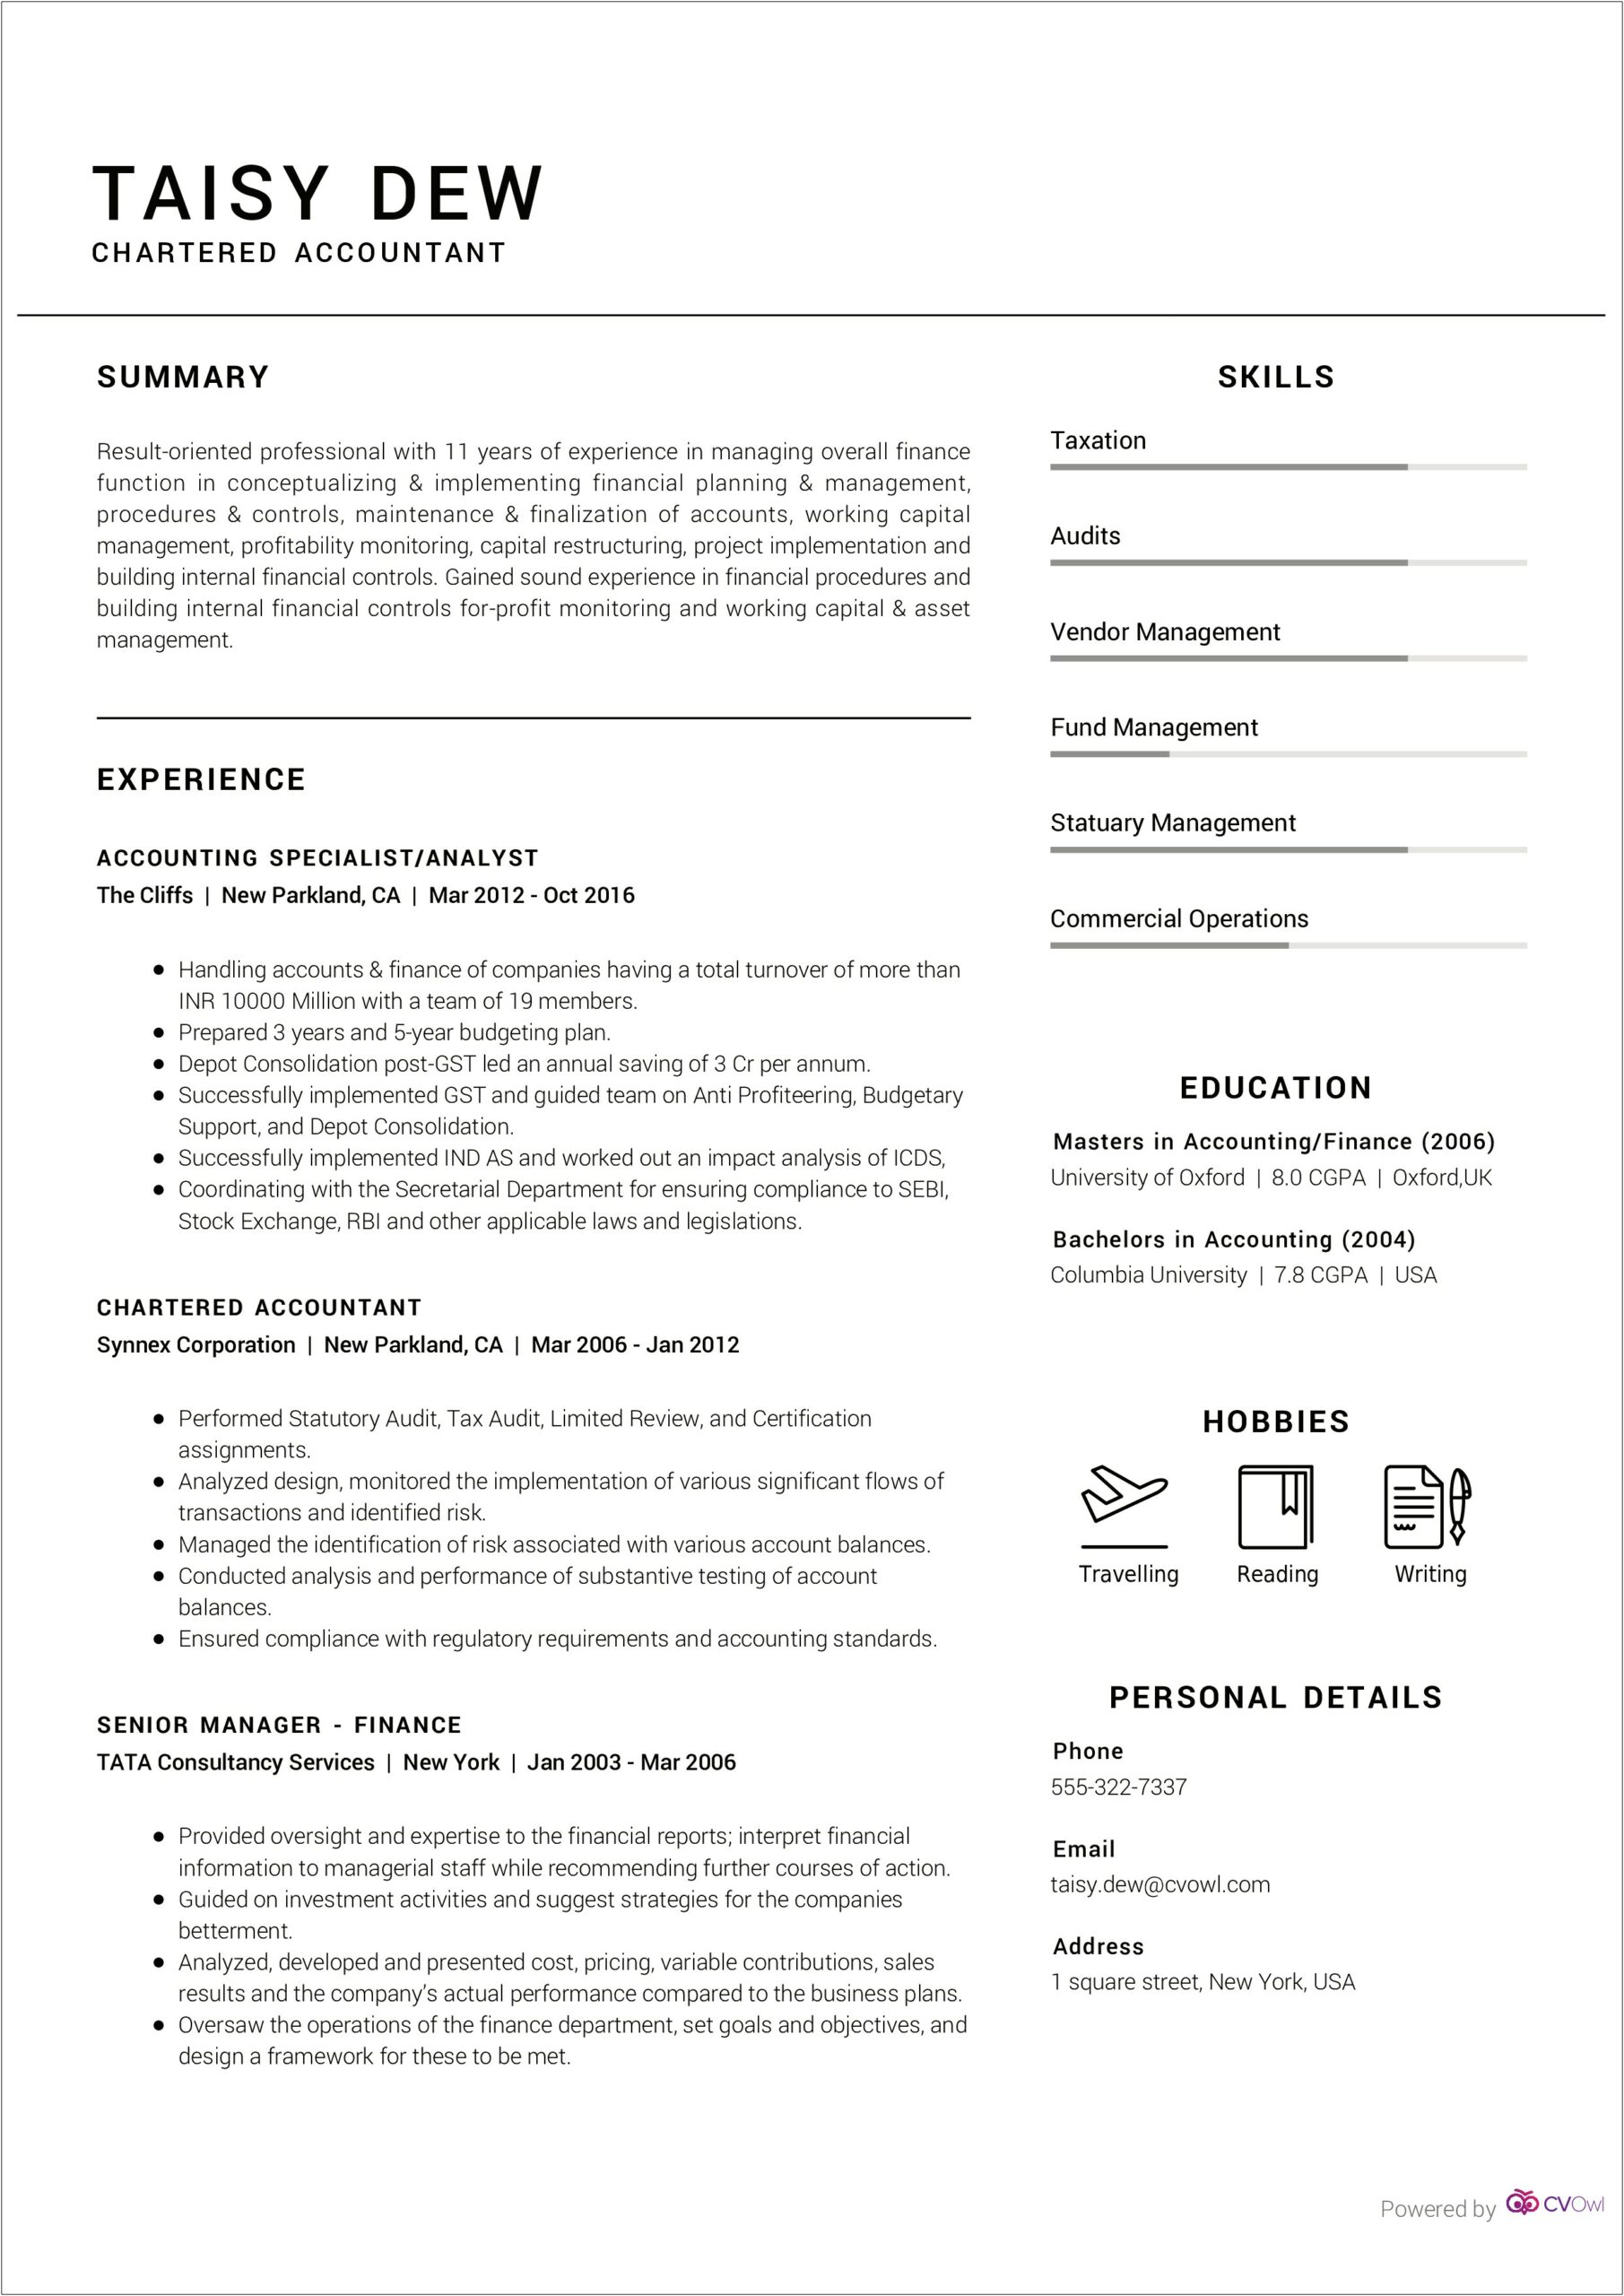 Education Before Or After Experience On Resume